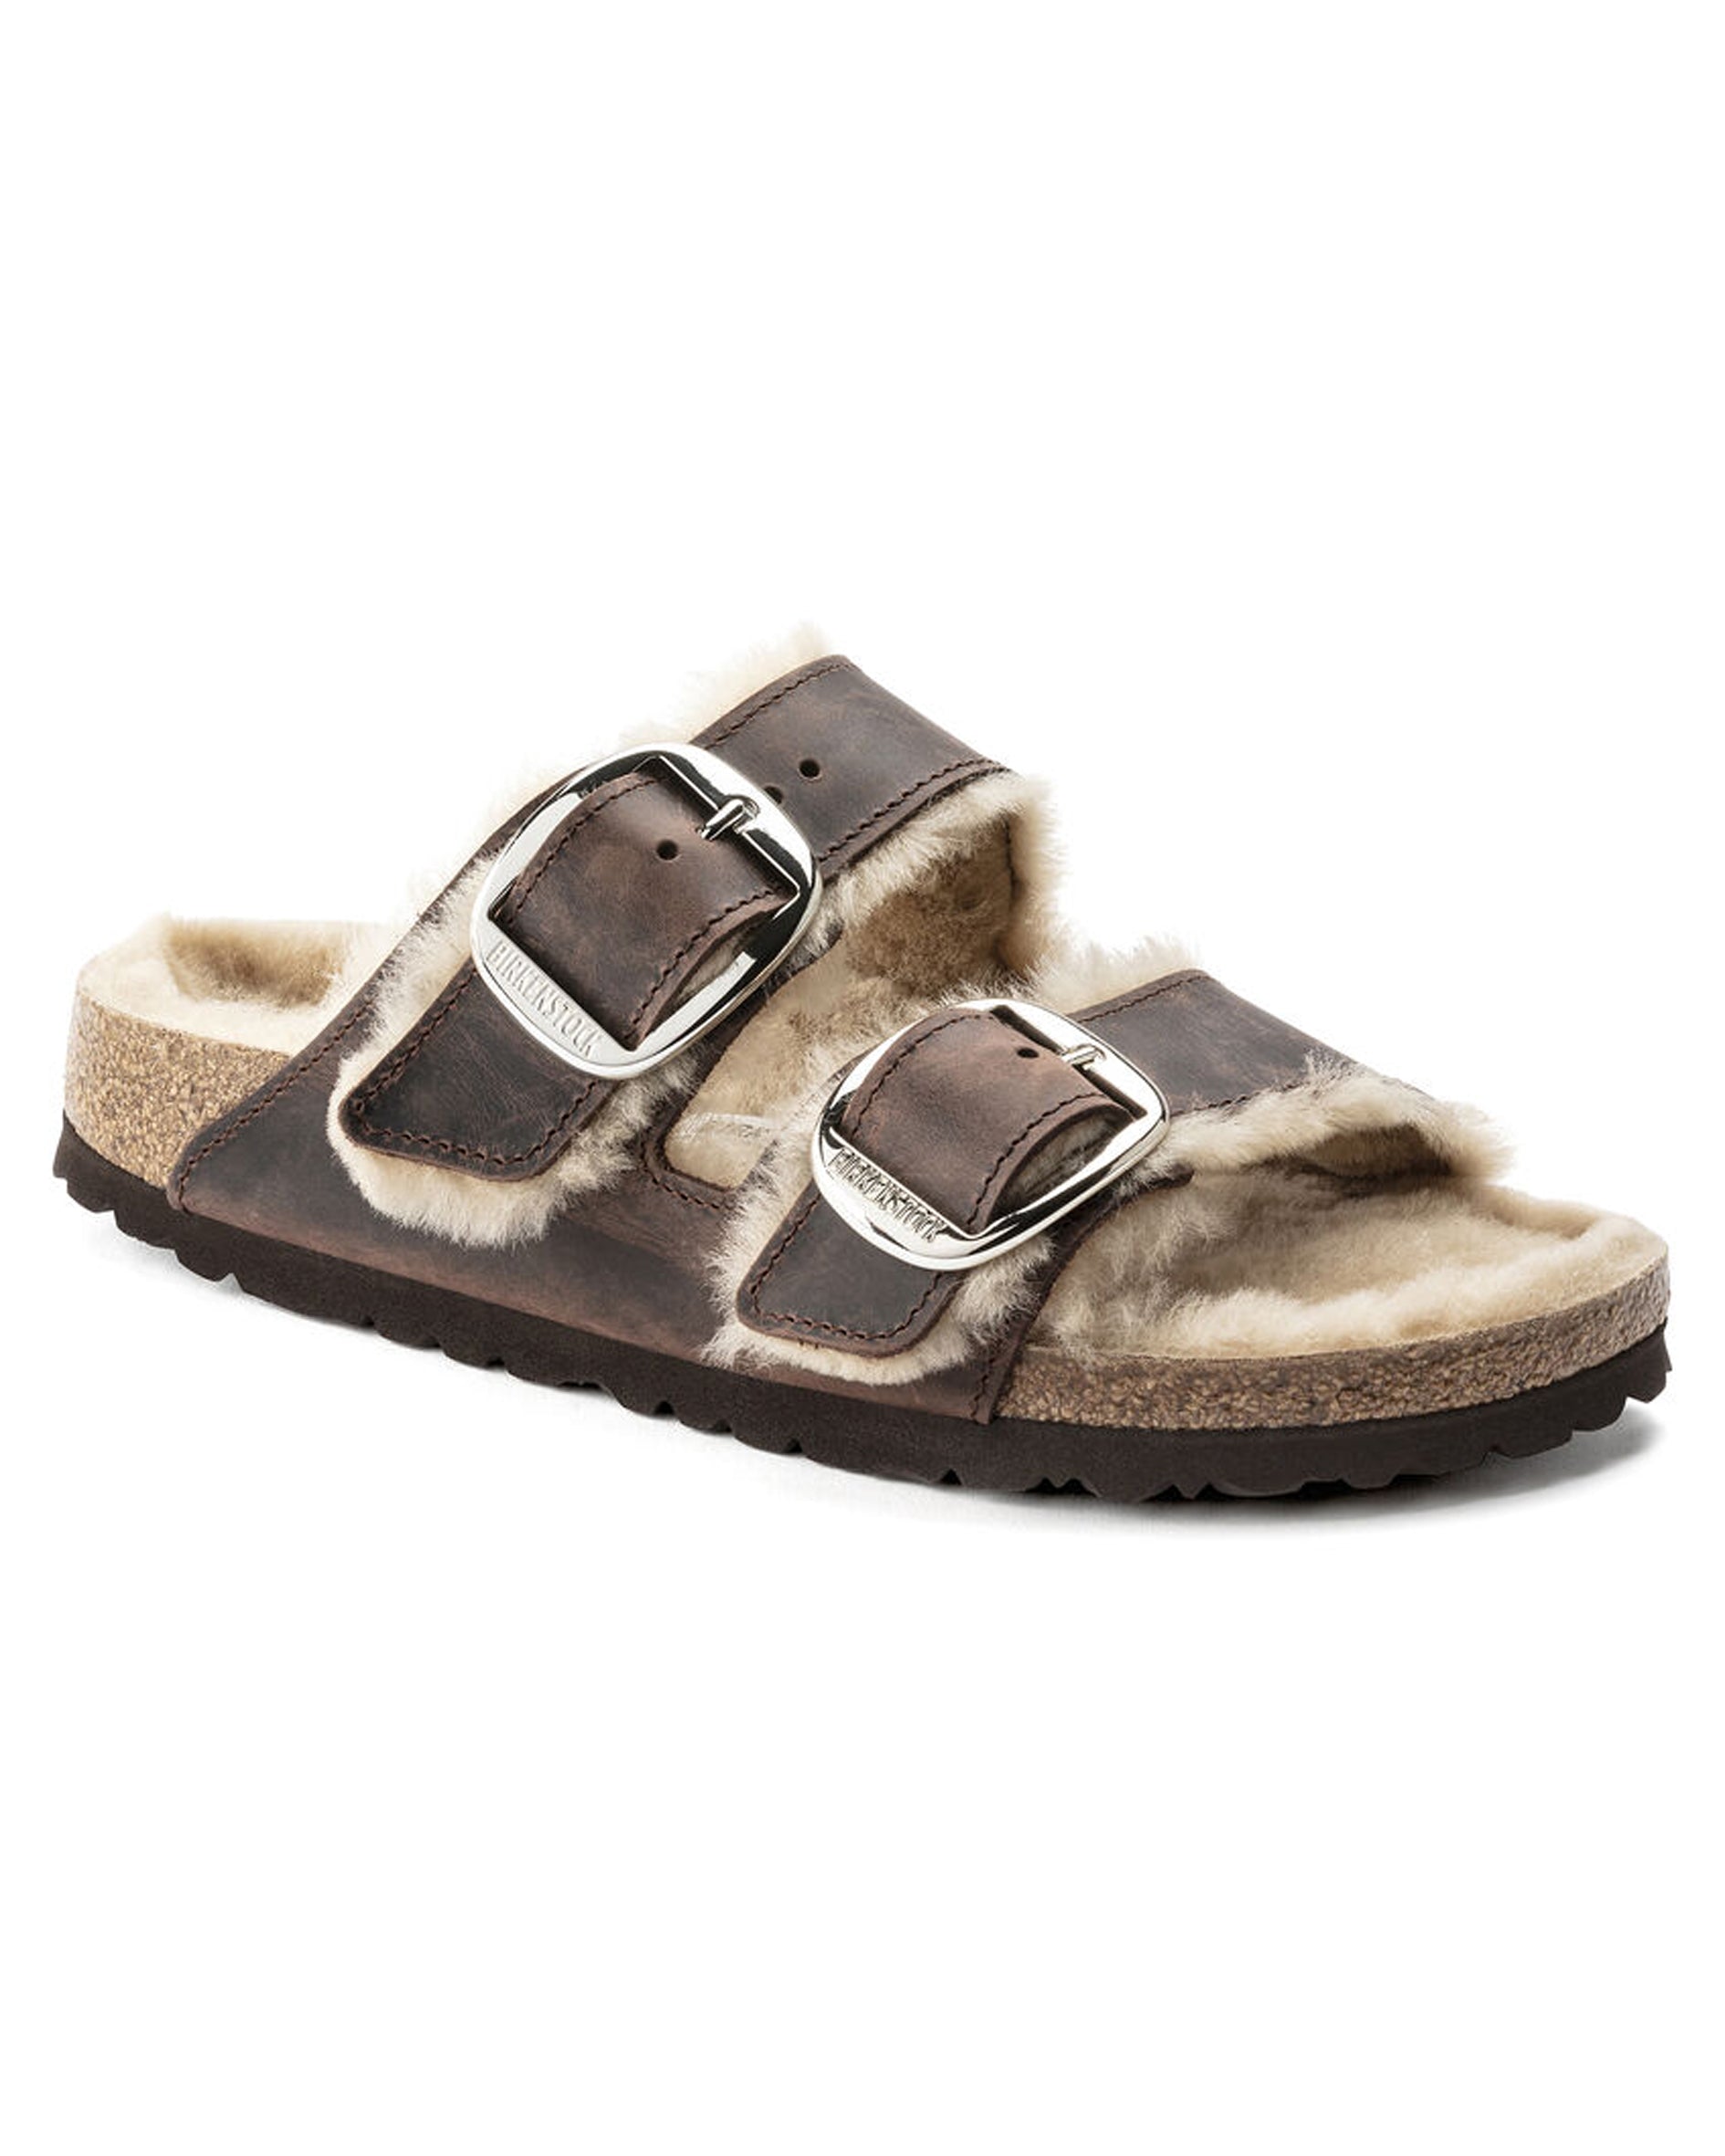 Arizona Big Buckle Shearling Brown Oiled Leather Sandals